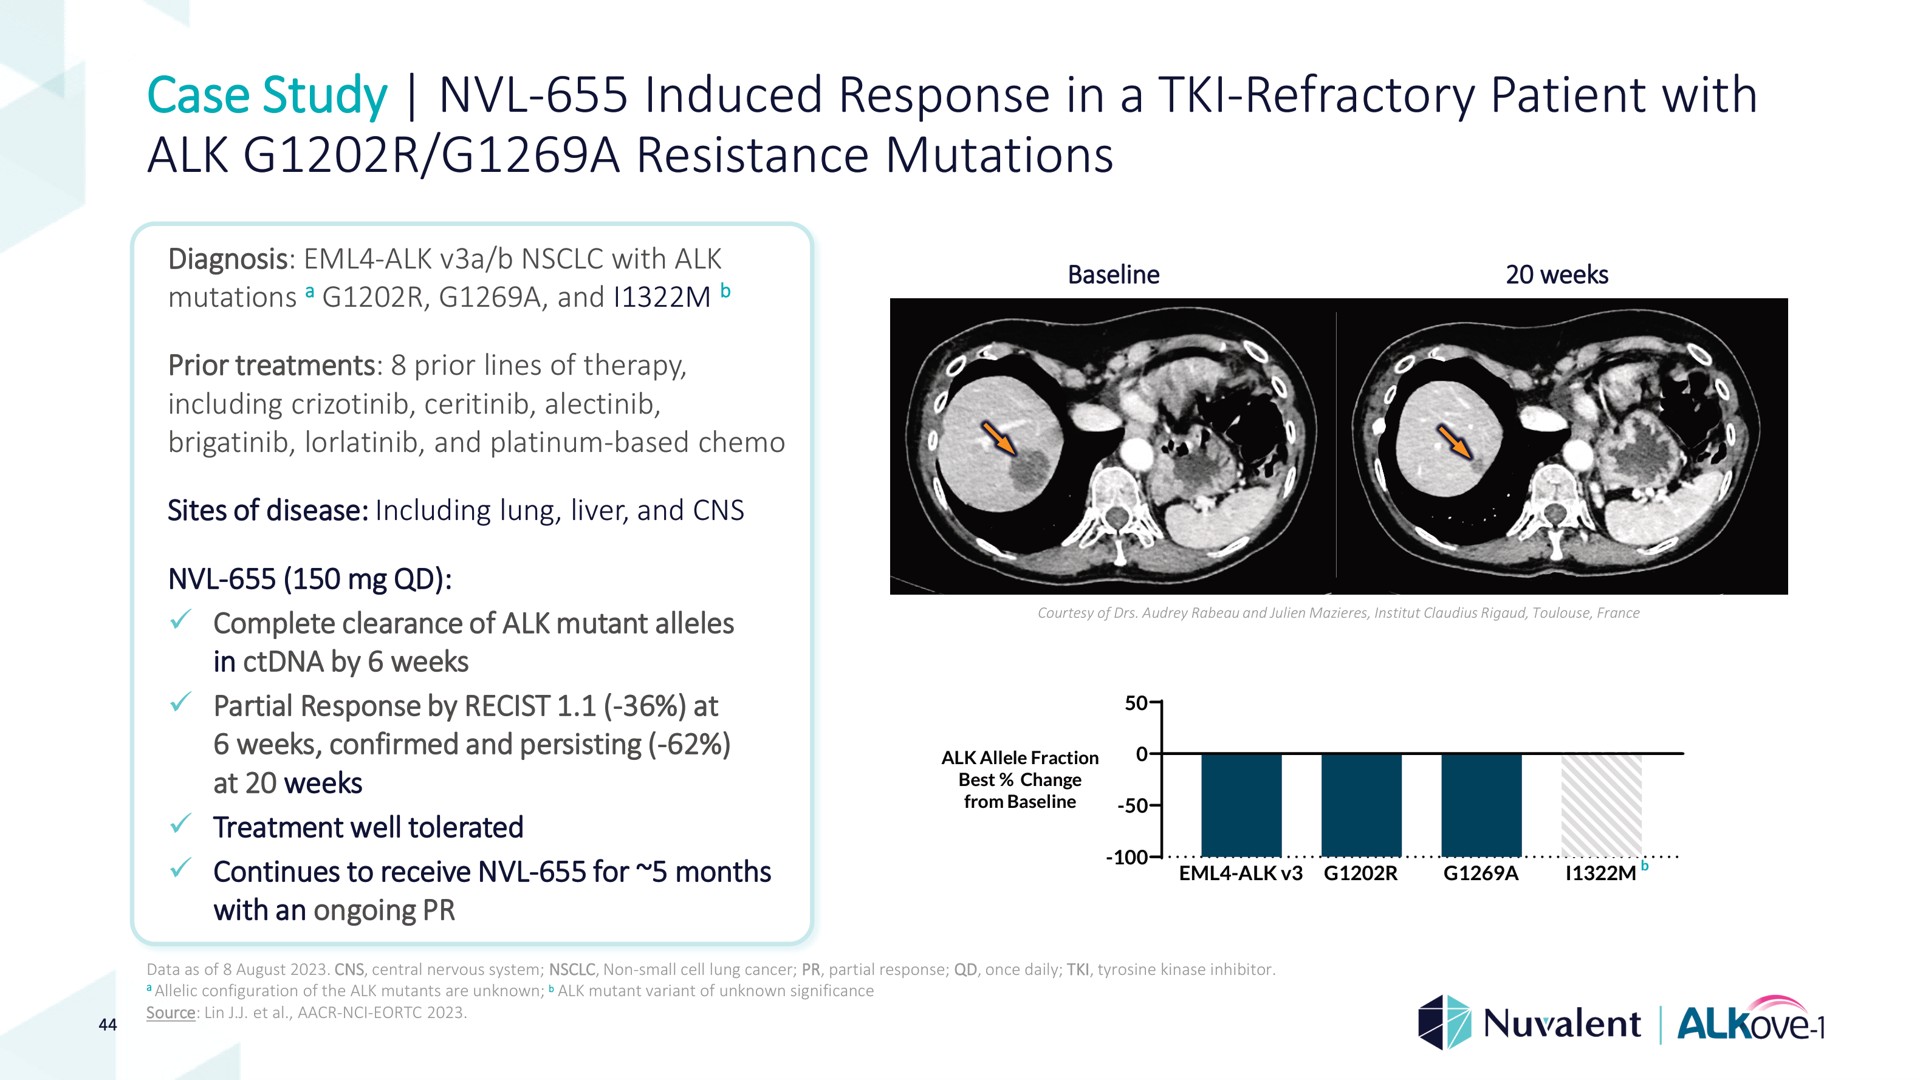 case study induced response in a refractory patient with alk a resistance mutations refractory | Nuvalent